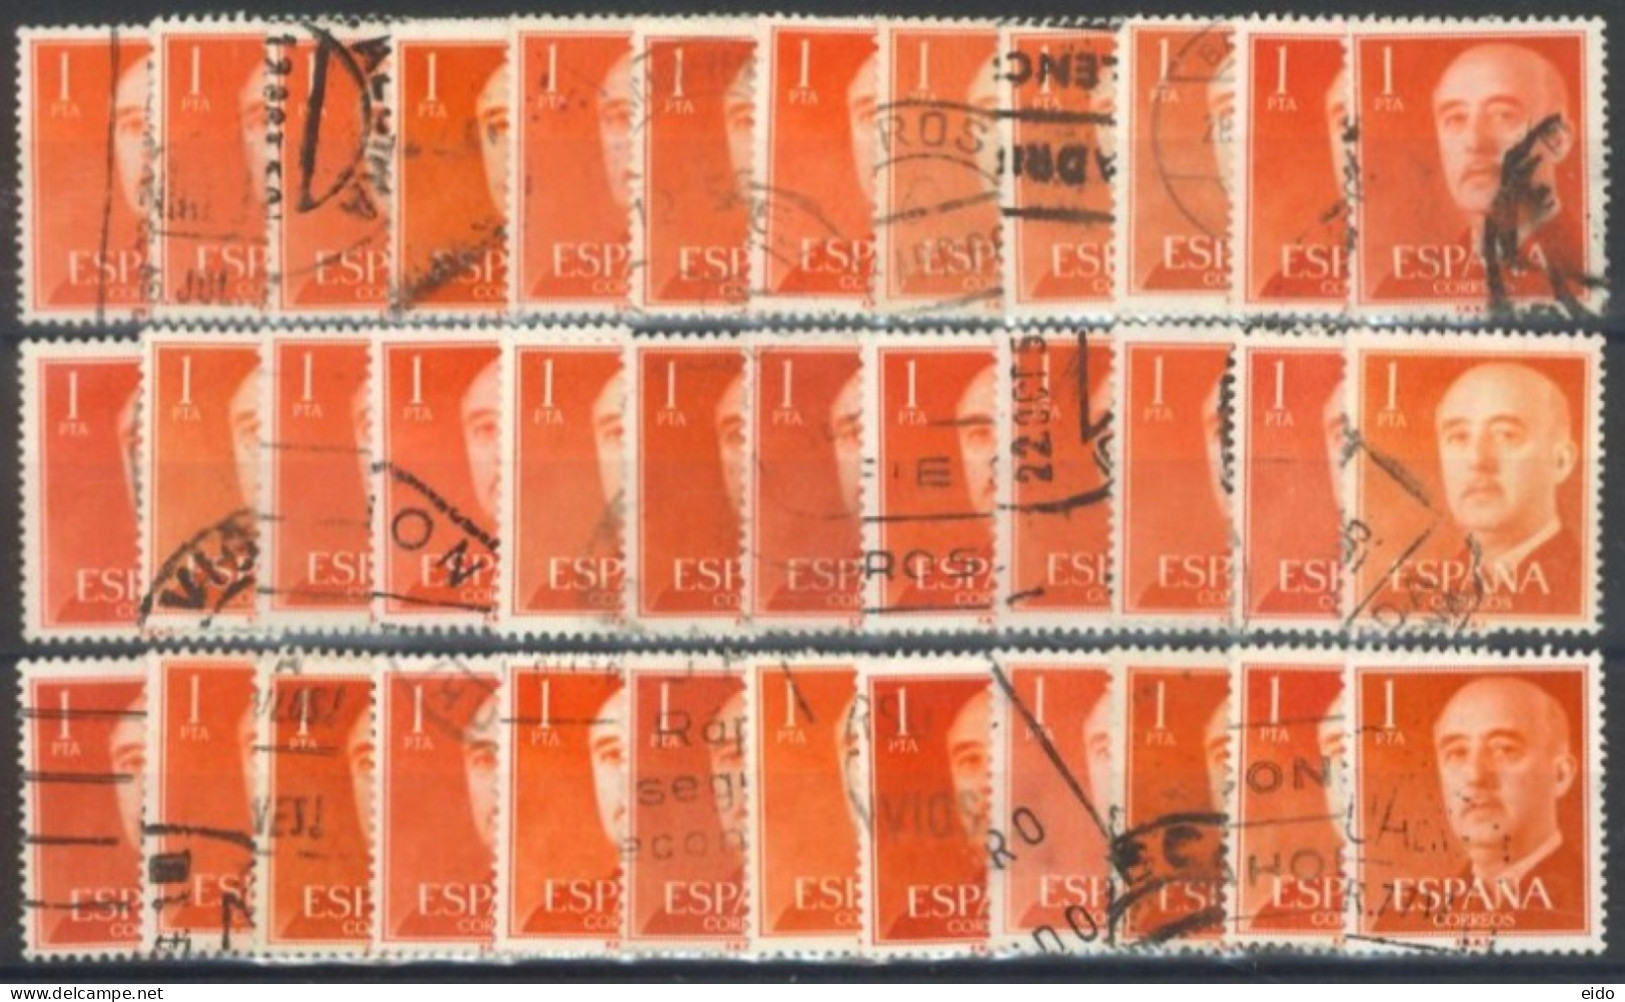 SPAIN- 1954/56, GENERAL FRANCO STAMP QTY : 36 REDUSED SPECIAL PRICE # 825, USED. - Used Stamps